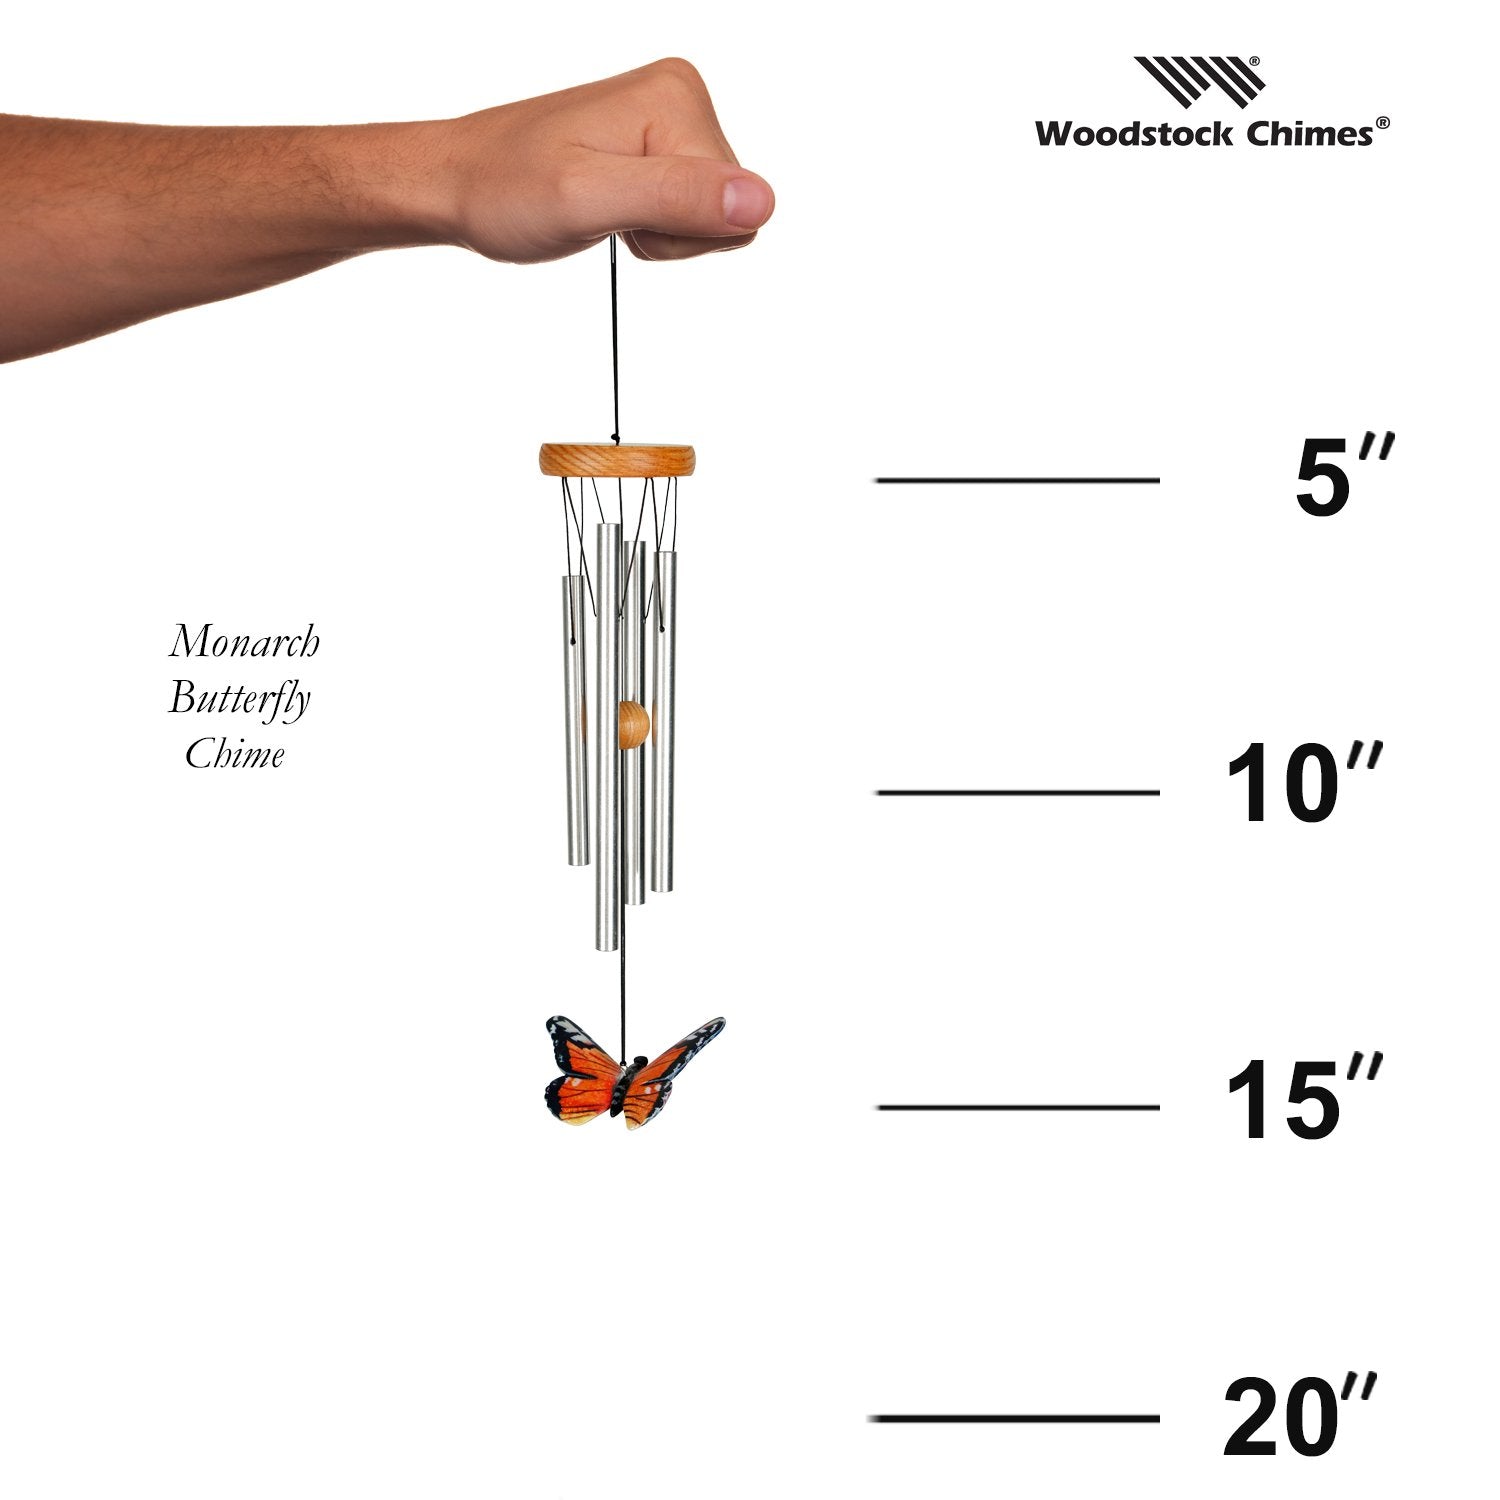 Monarch Butterfly Chime proportion image